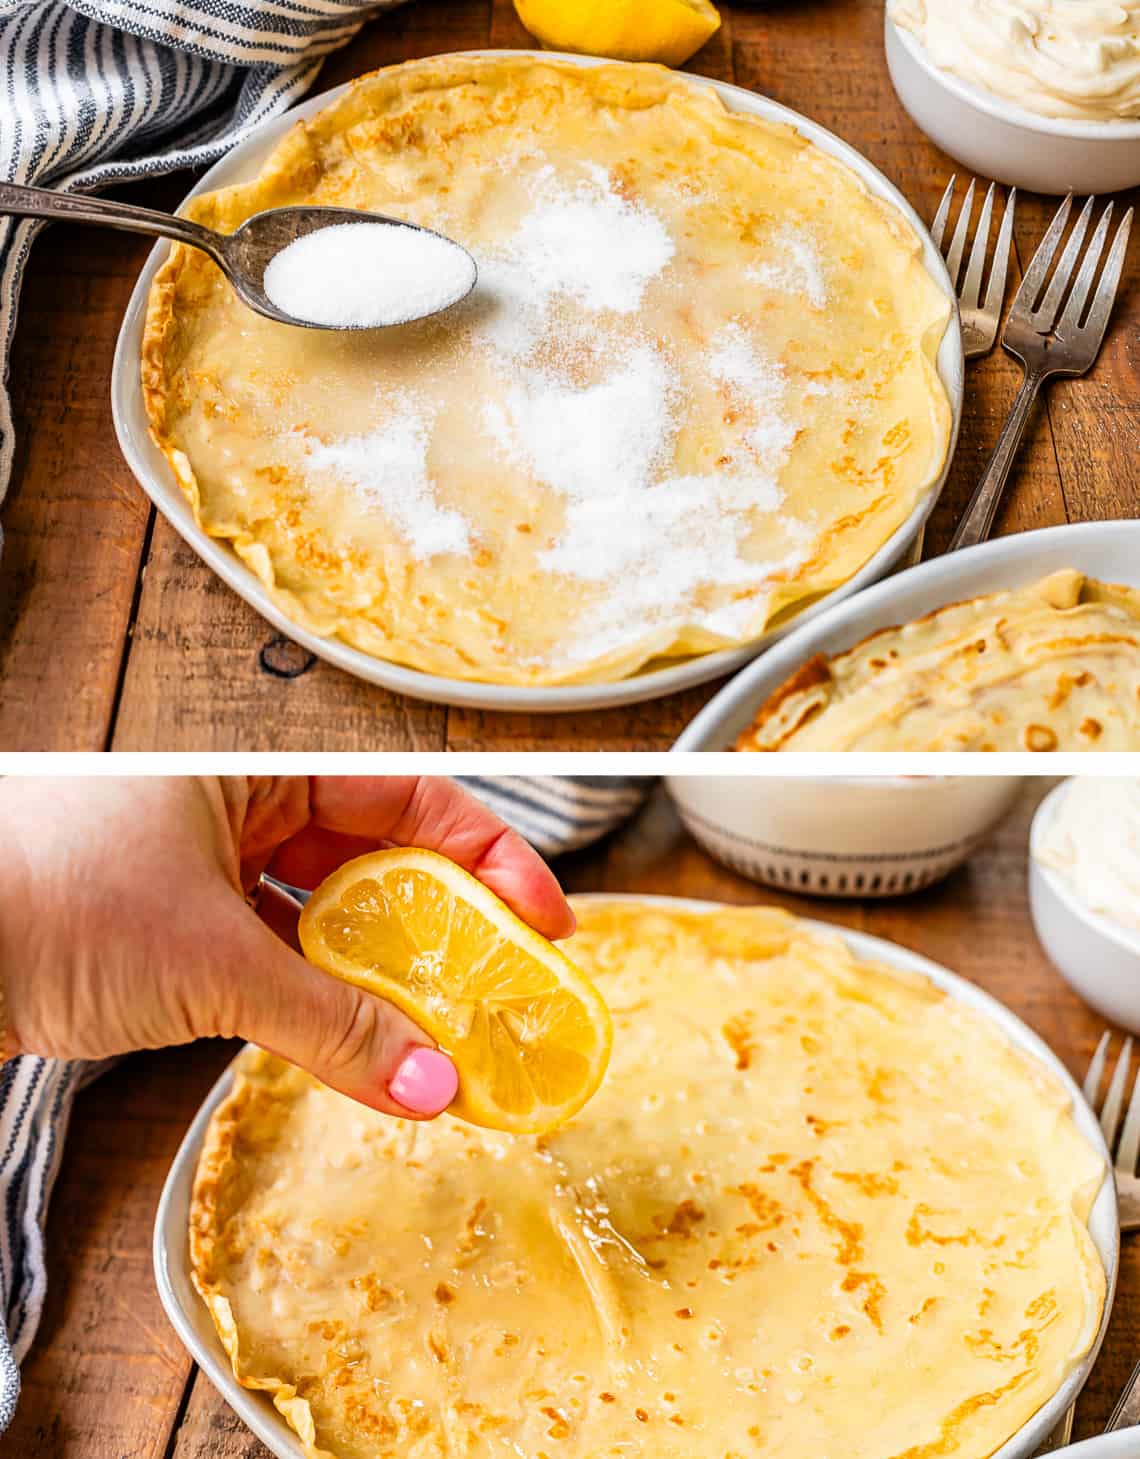 top spoon pouring sugar on a crepe, bottom squeezing juice from a lemon over both.